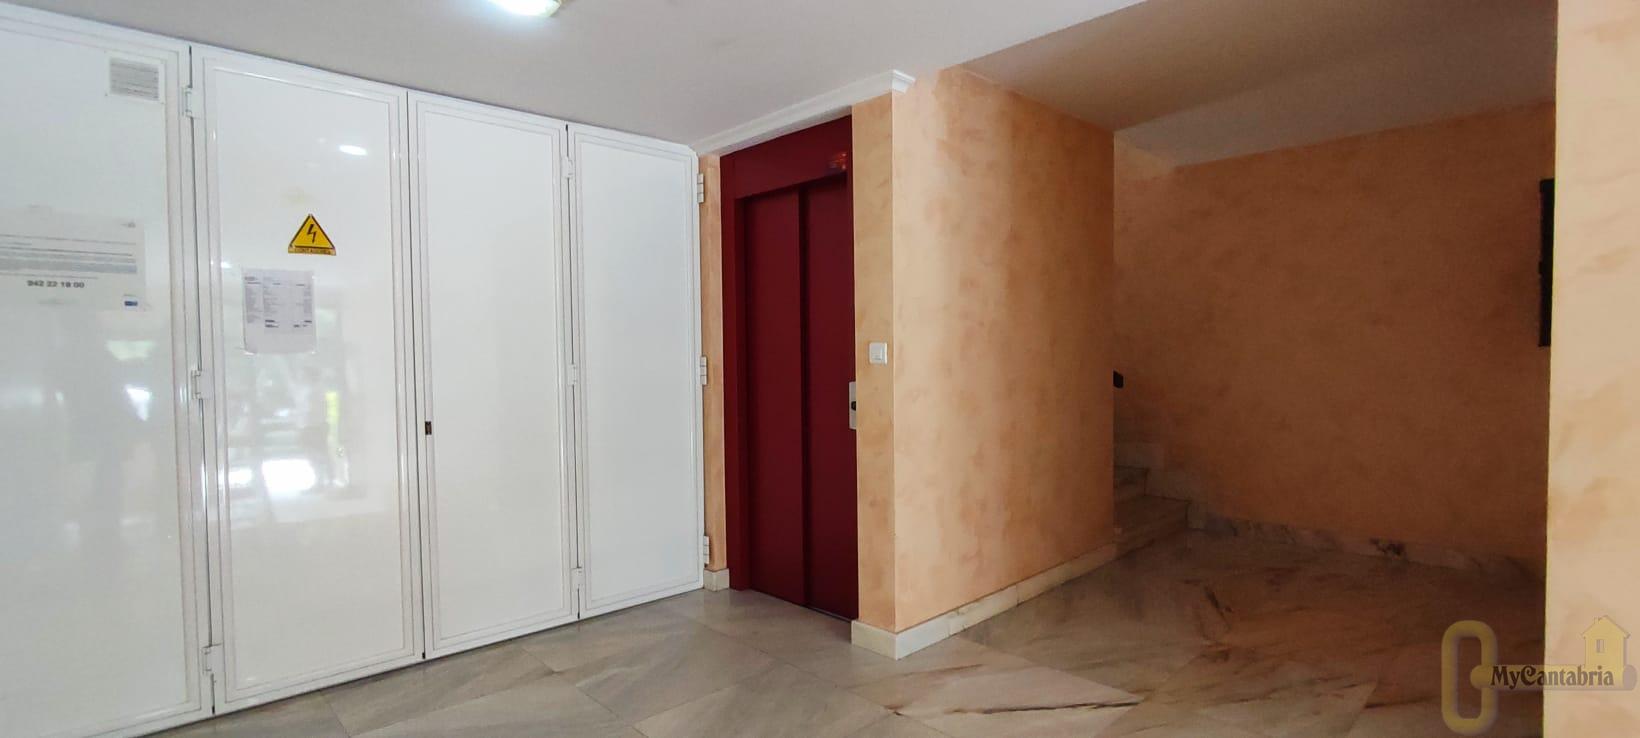 For sale of flat in Limpias